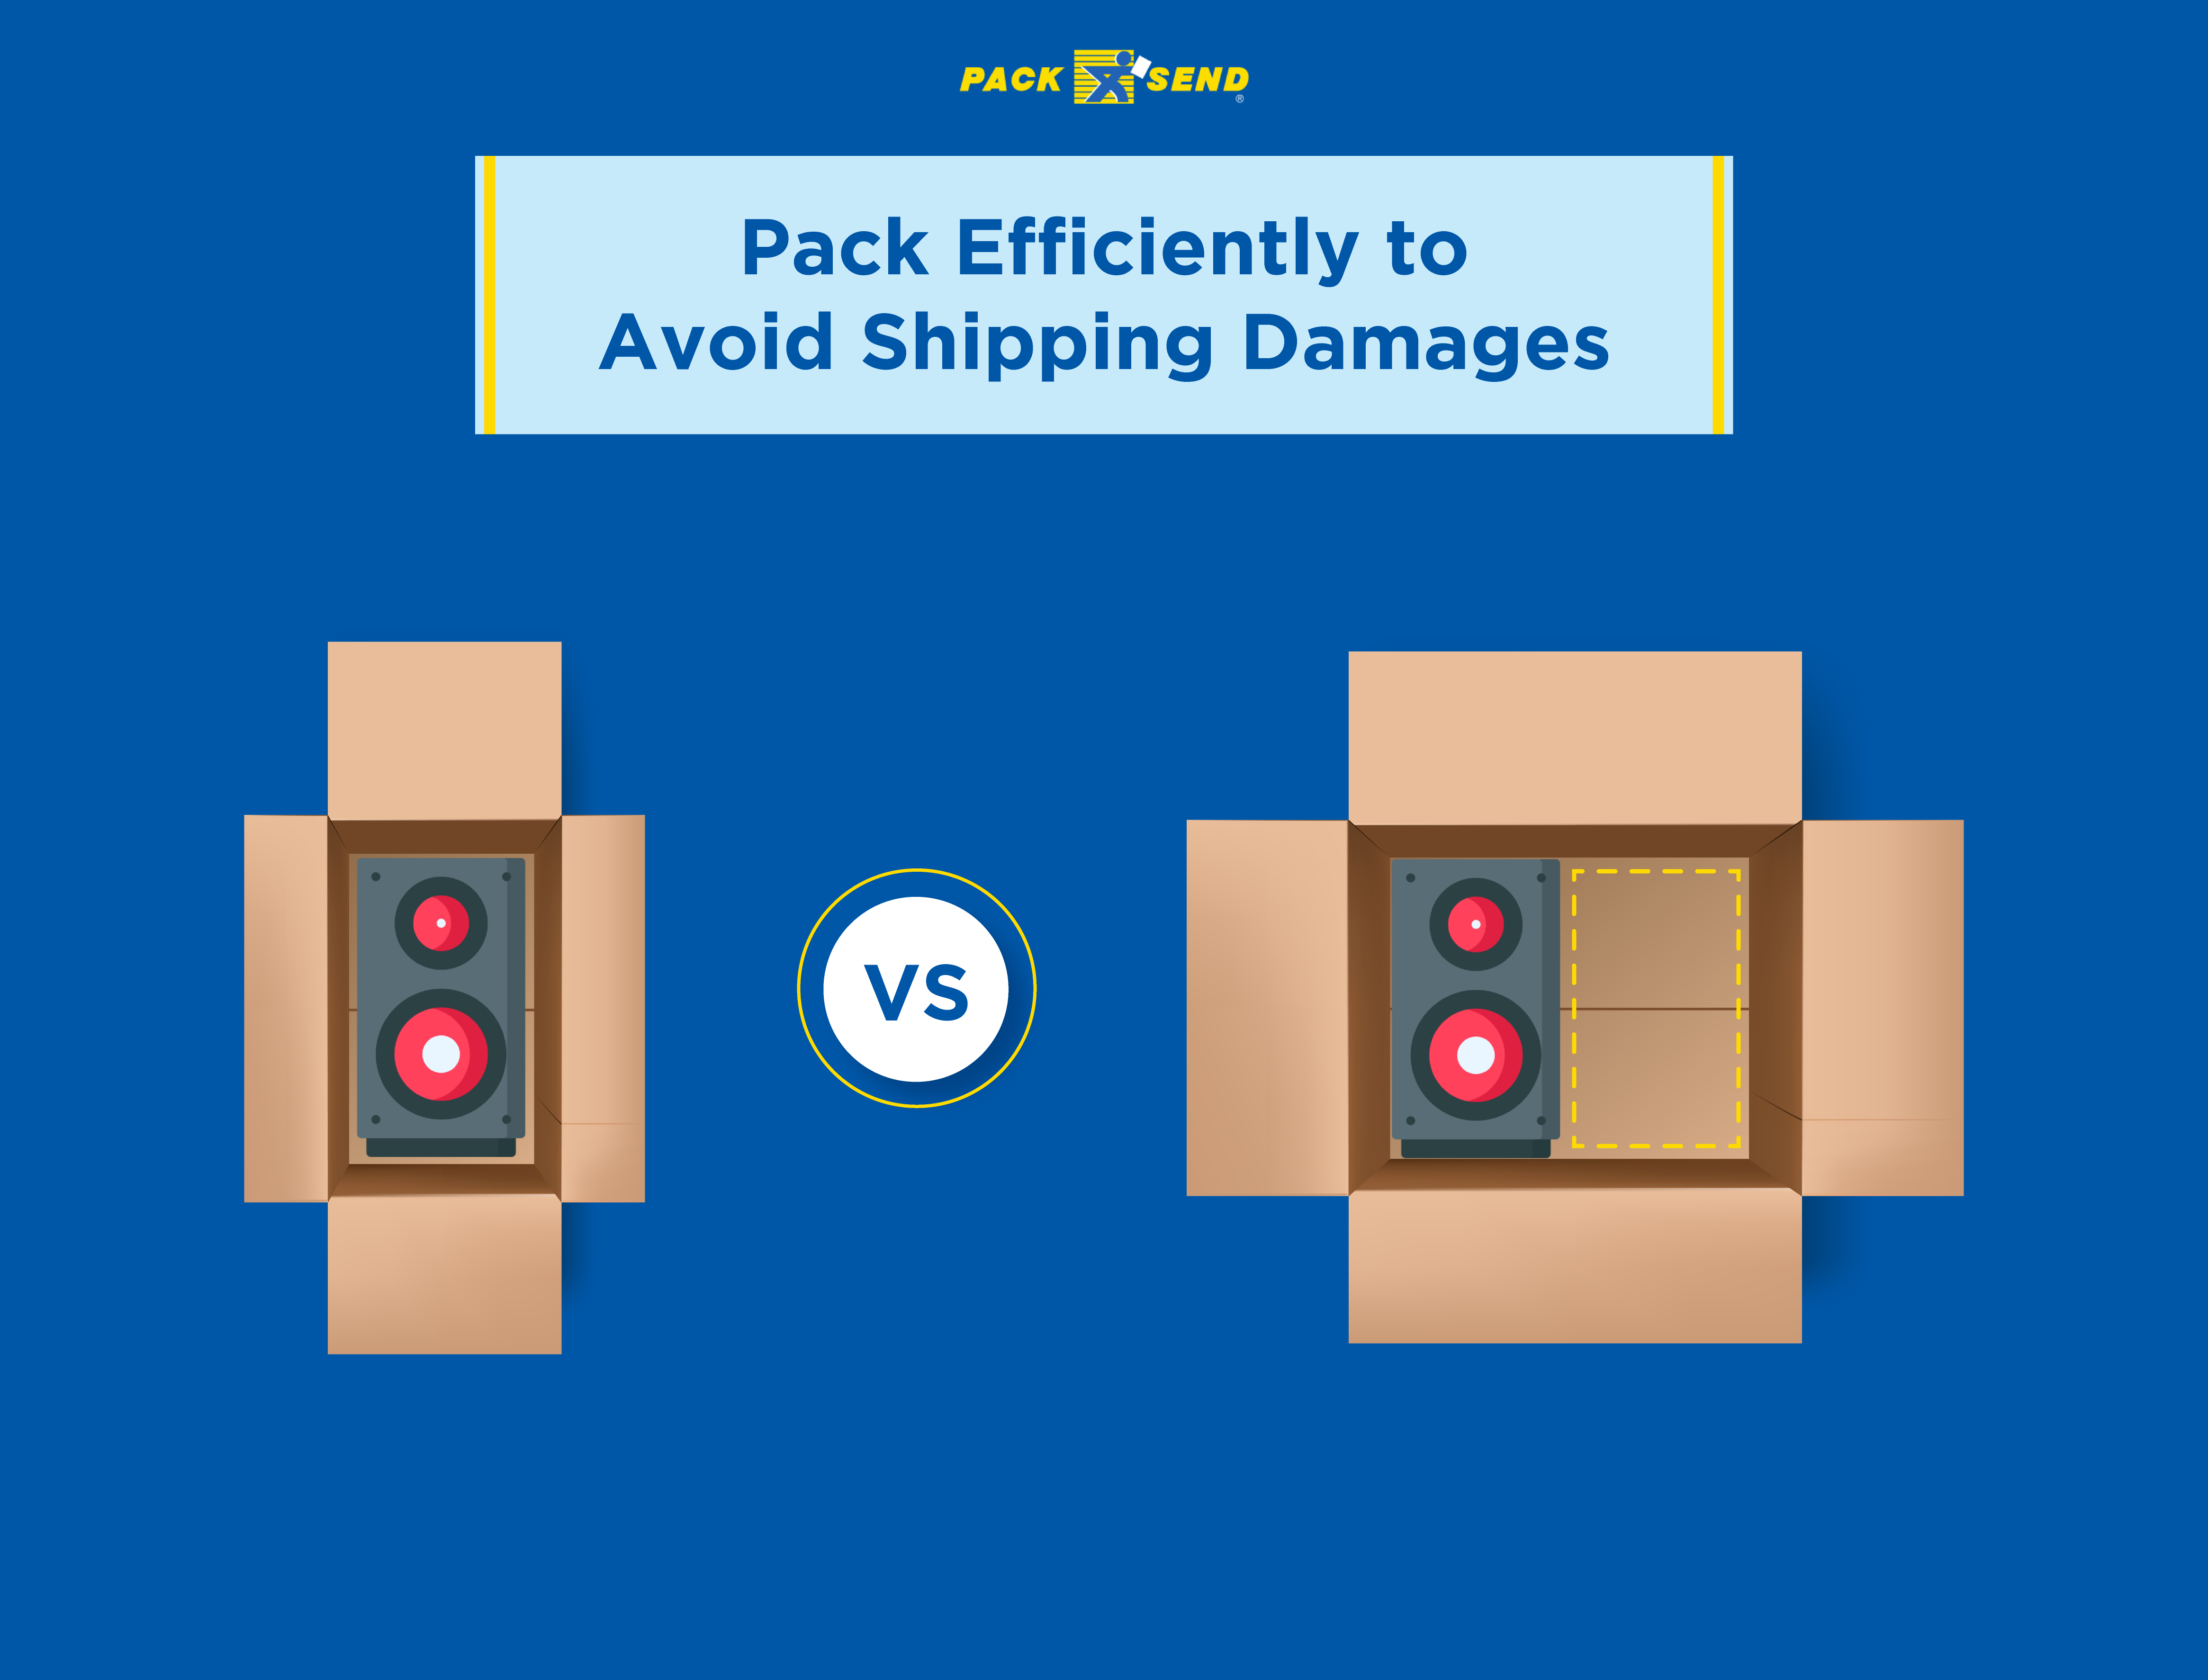 How to pack efficiently to avoid shipping damges